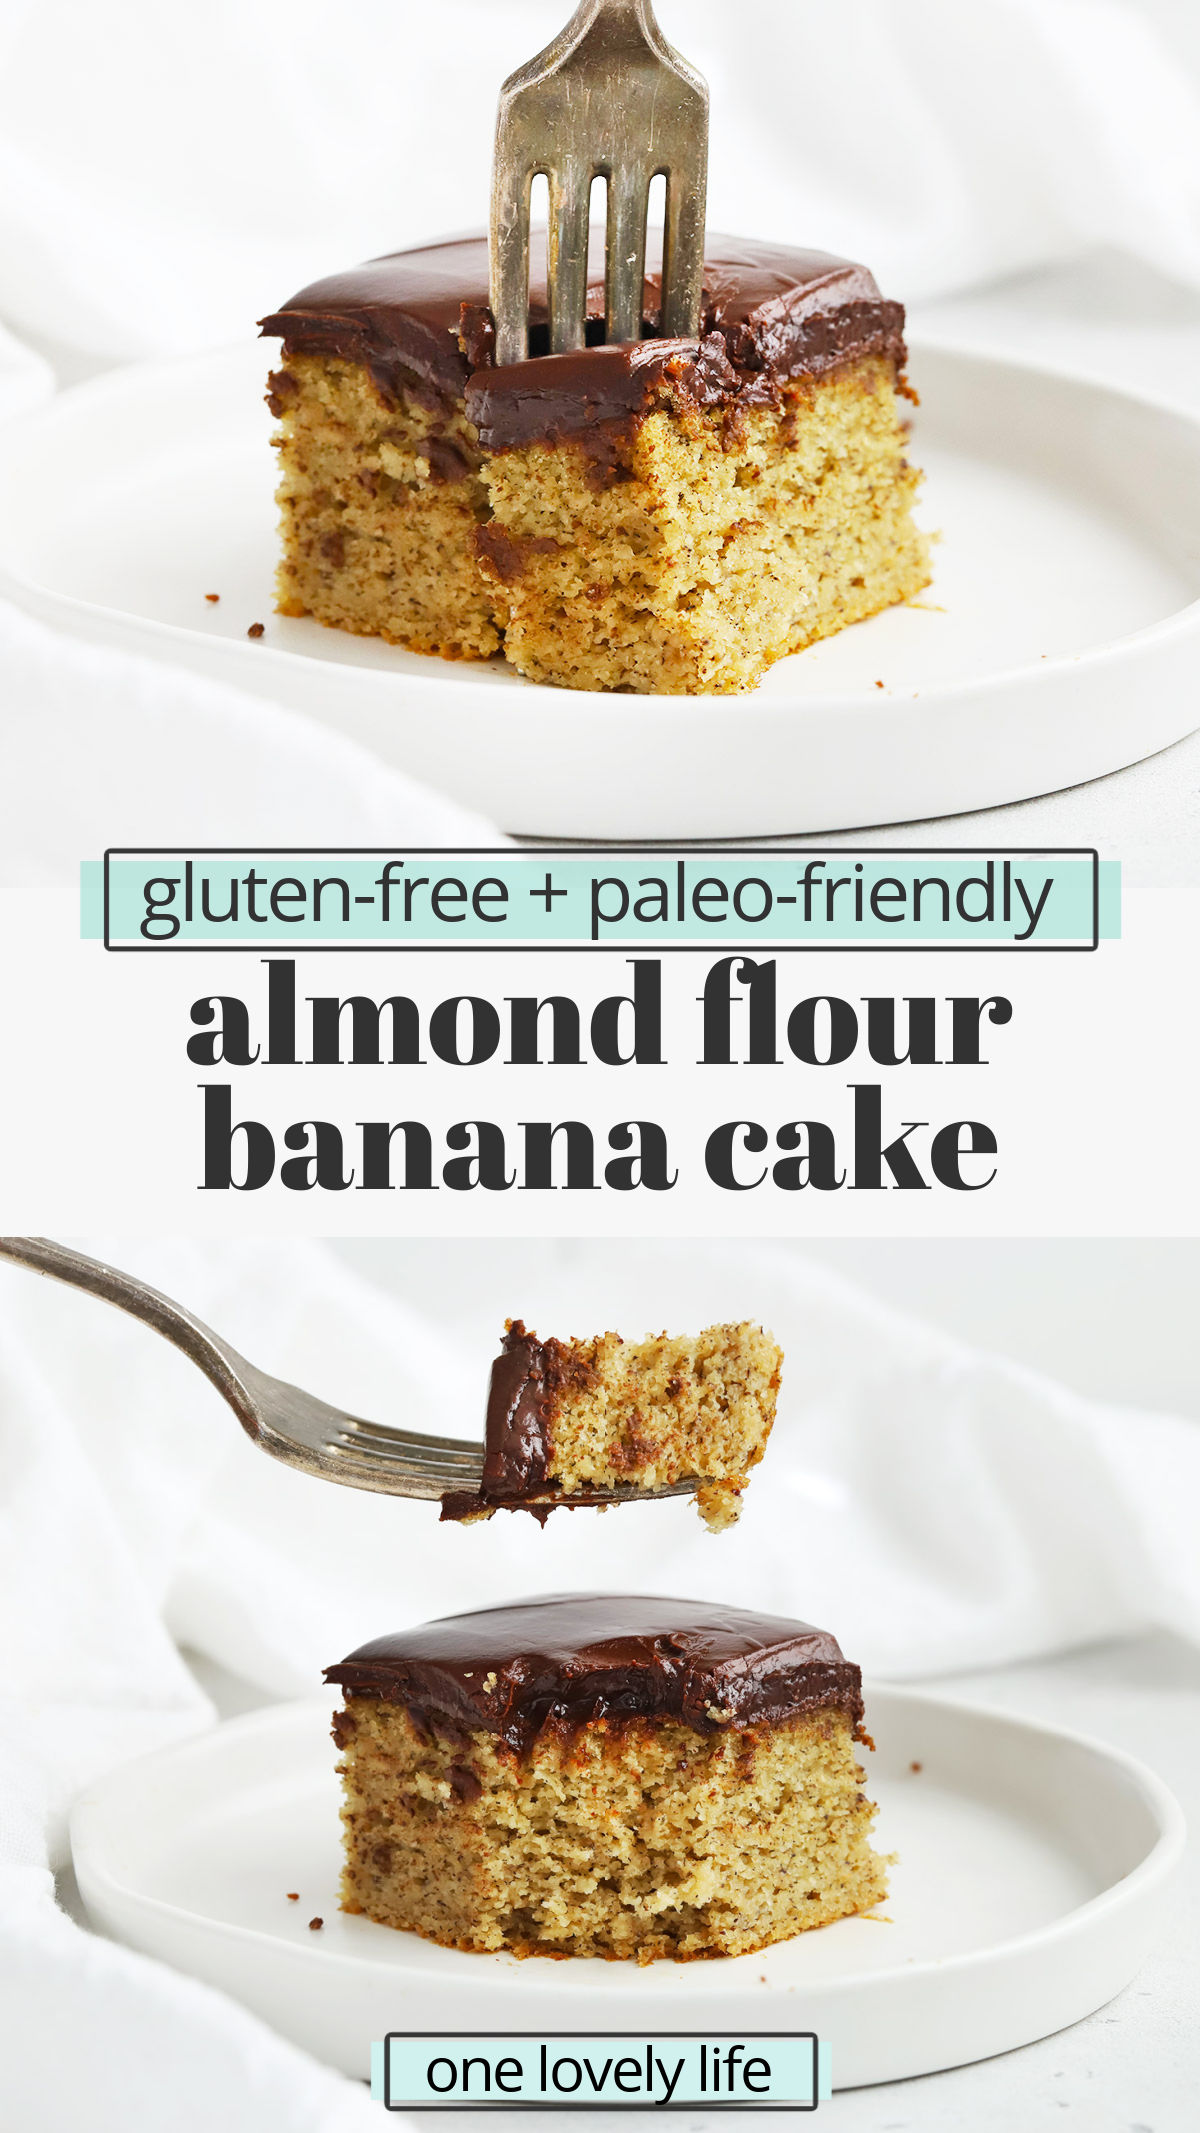 Almond Flour Banana Cake - This easy gluten-free banana cake with chocolate ganache is the perfect way to use up overripe bananas! (Healthy, paleo friendly, and absolutely amazing!) // Healthy Banana Cake // Paleo Banana Cake // Gluten Free Banana Cake // Banana Cake recipe // Almond Flour cake // smash cake #glutenfree #cake #bananacake #almondflour #paleo